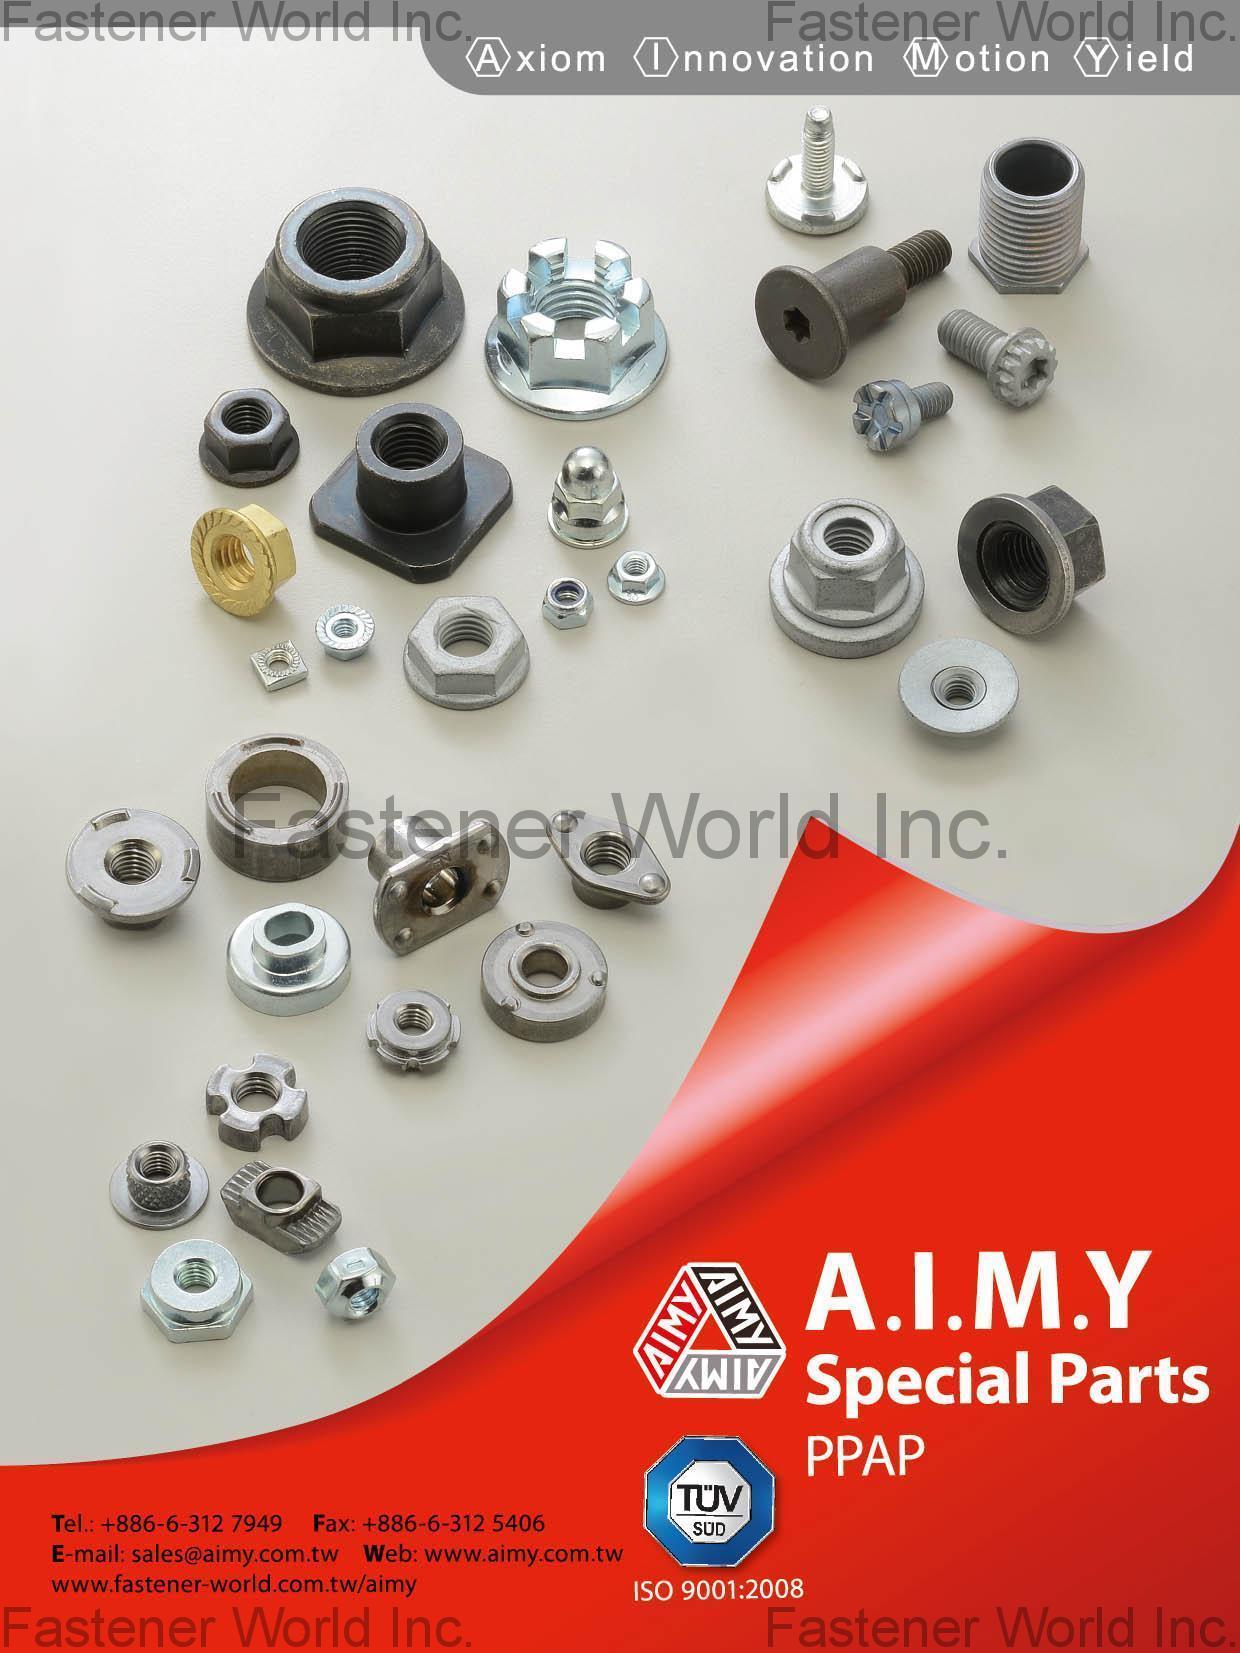 A.I.M.Y Co., Ltd. (AIMY) , Special Nuts, Comby Nuts, Hex Flange Weld Nuts, Sems Screws, Special Screws, Screws & Bolts, Special Rivet, Sleeve, Pins, Stamping Parts & Forming Parts, Turning Parts , Automotive Nuts